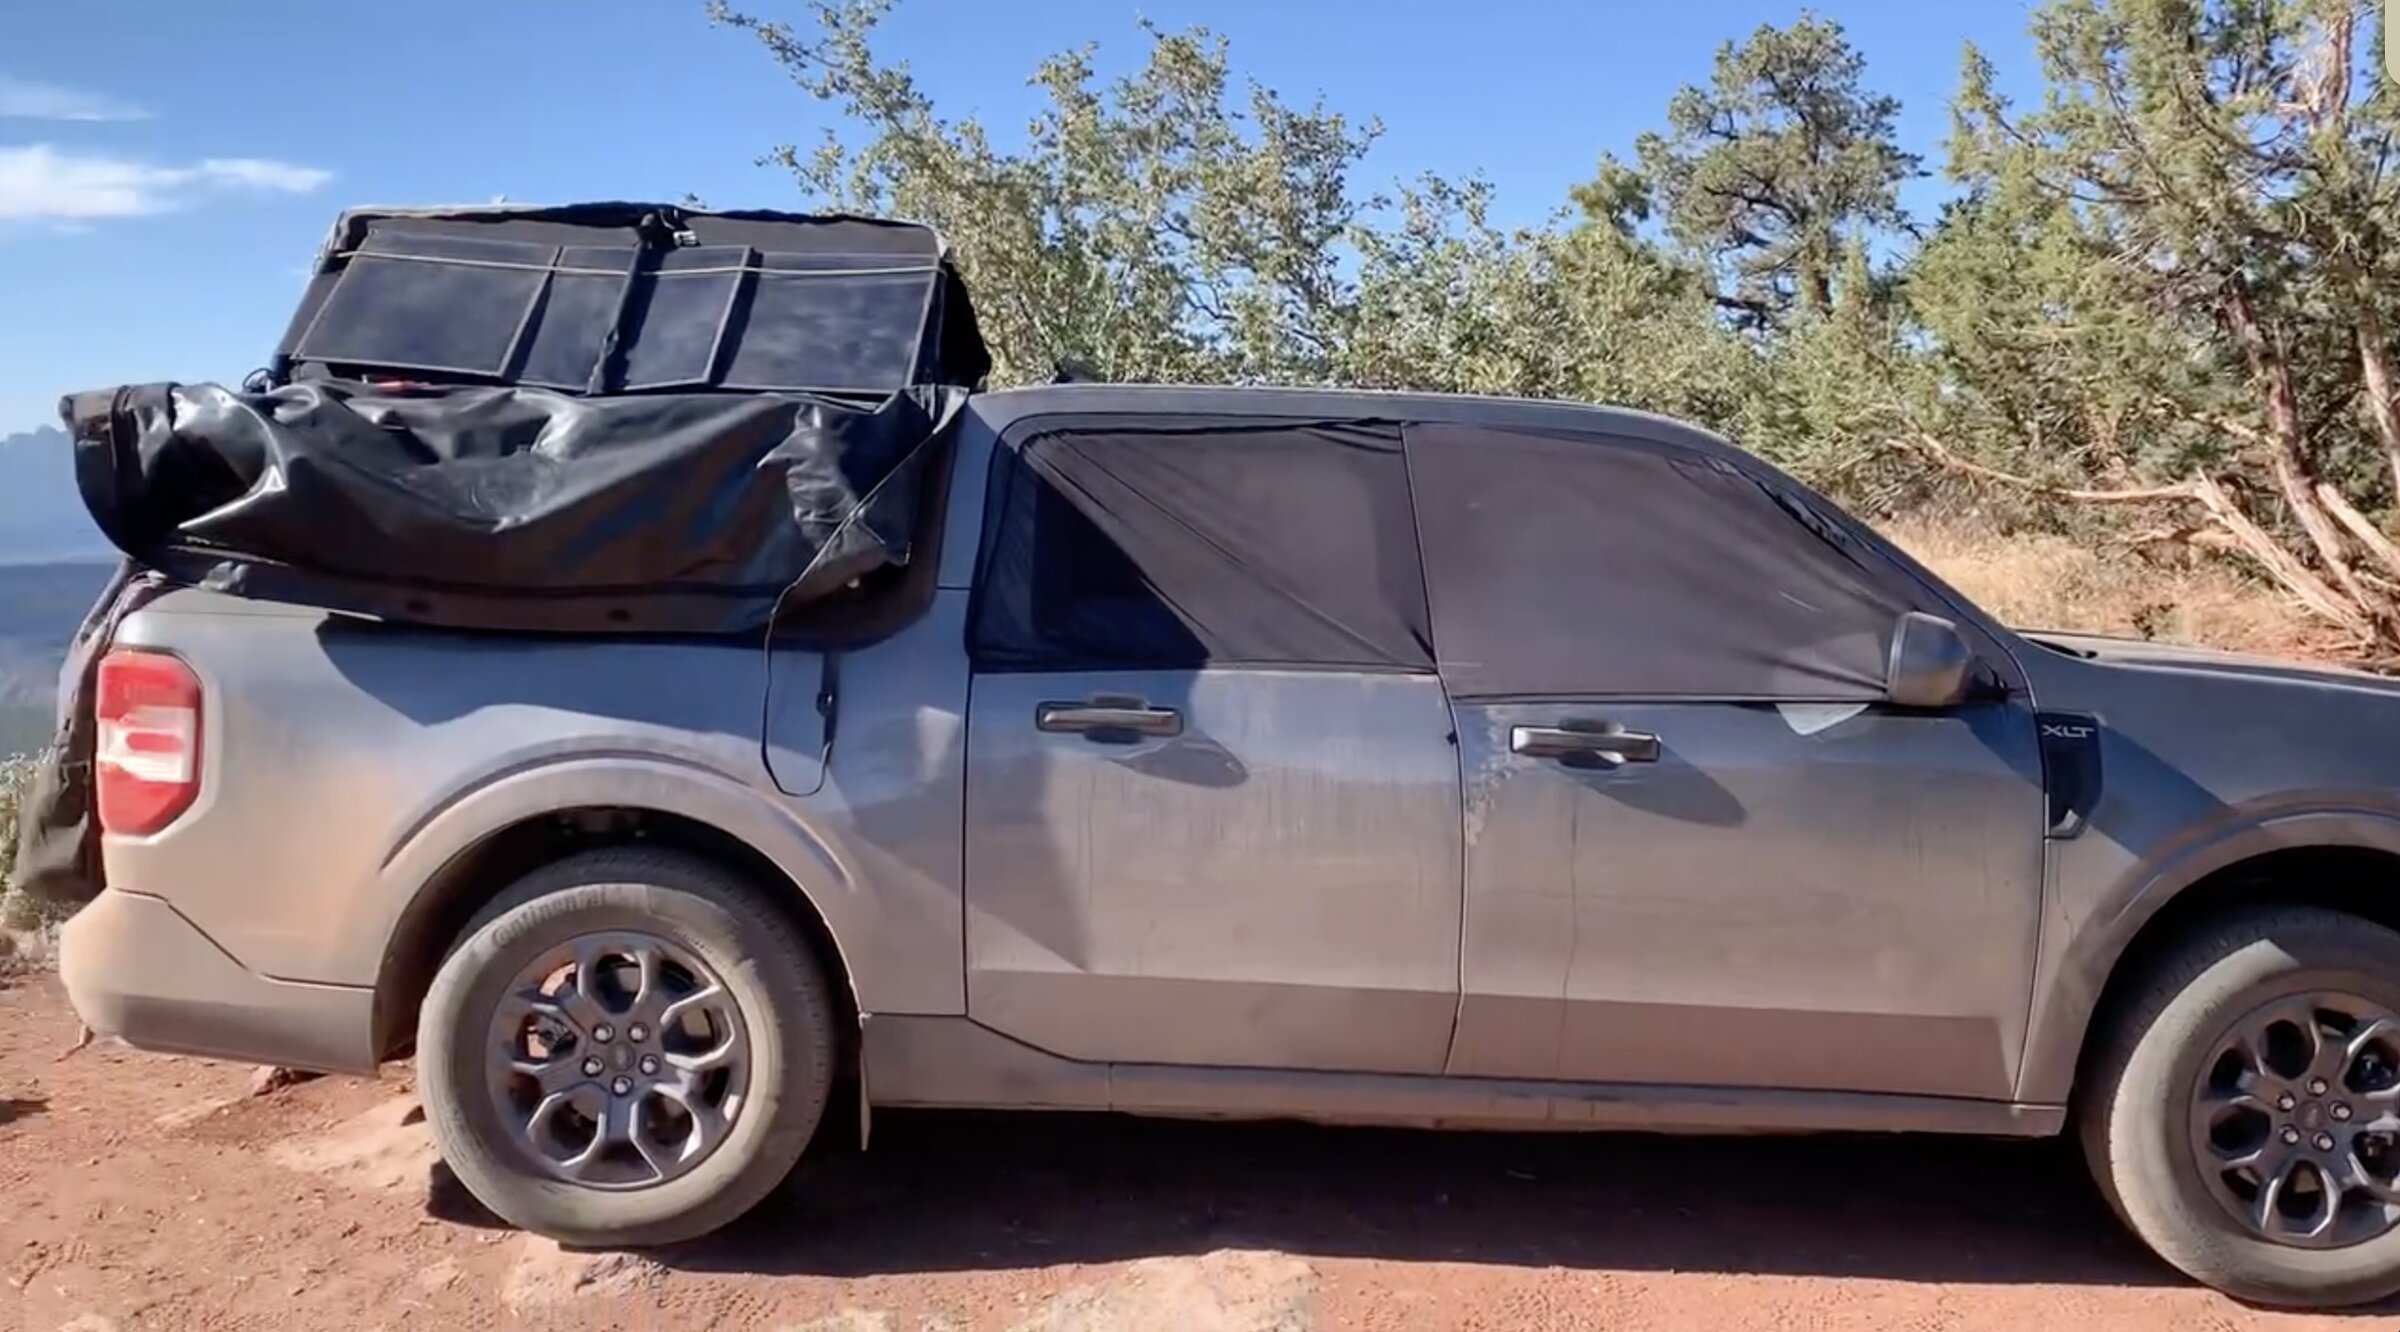 Ford Maverick Maverick Zion - living in my Maverick for past 2 months traveling CA, NV, UT using Kamp-Rite Double Tent Cot Screen Shot 2022-05-25 at 6.35.49 PM